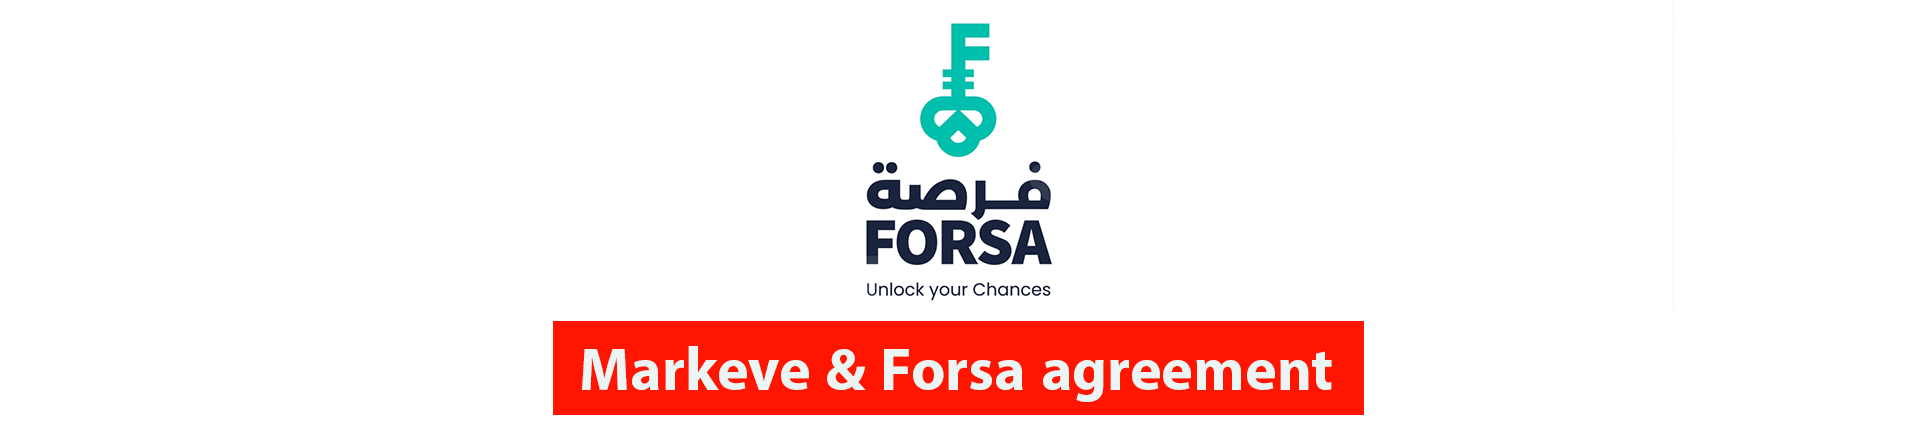 Markeve Group and FORSA Join Forces to Empower Clients with Credited Digital Marketing Services